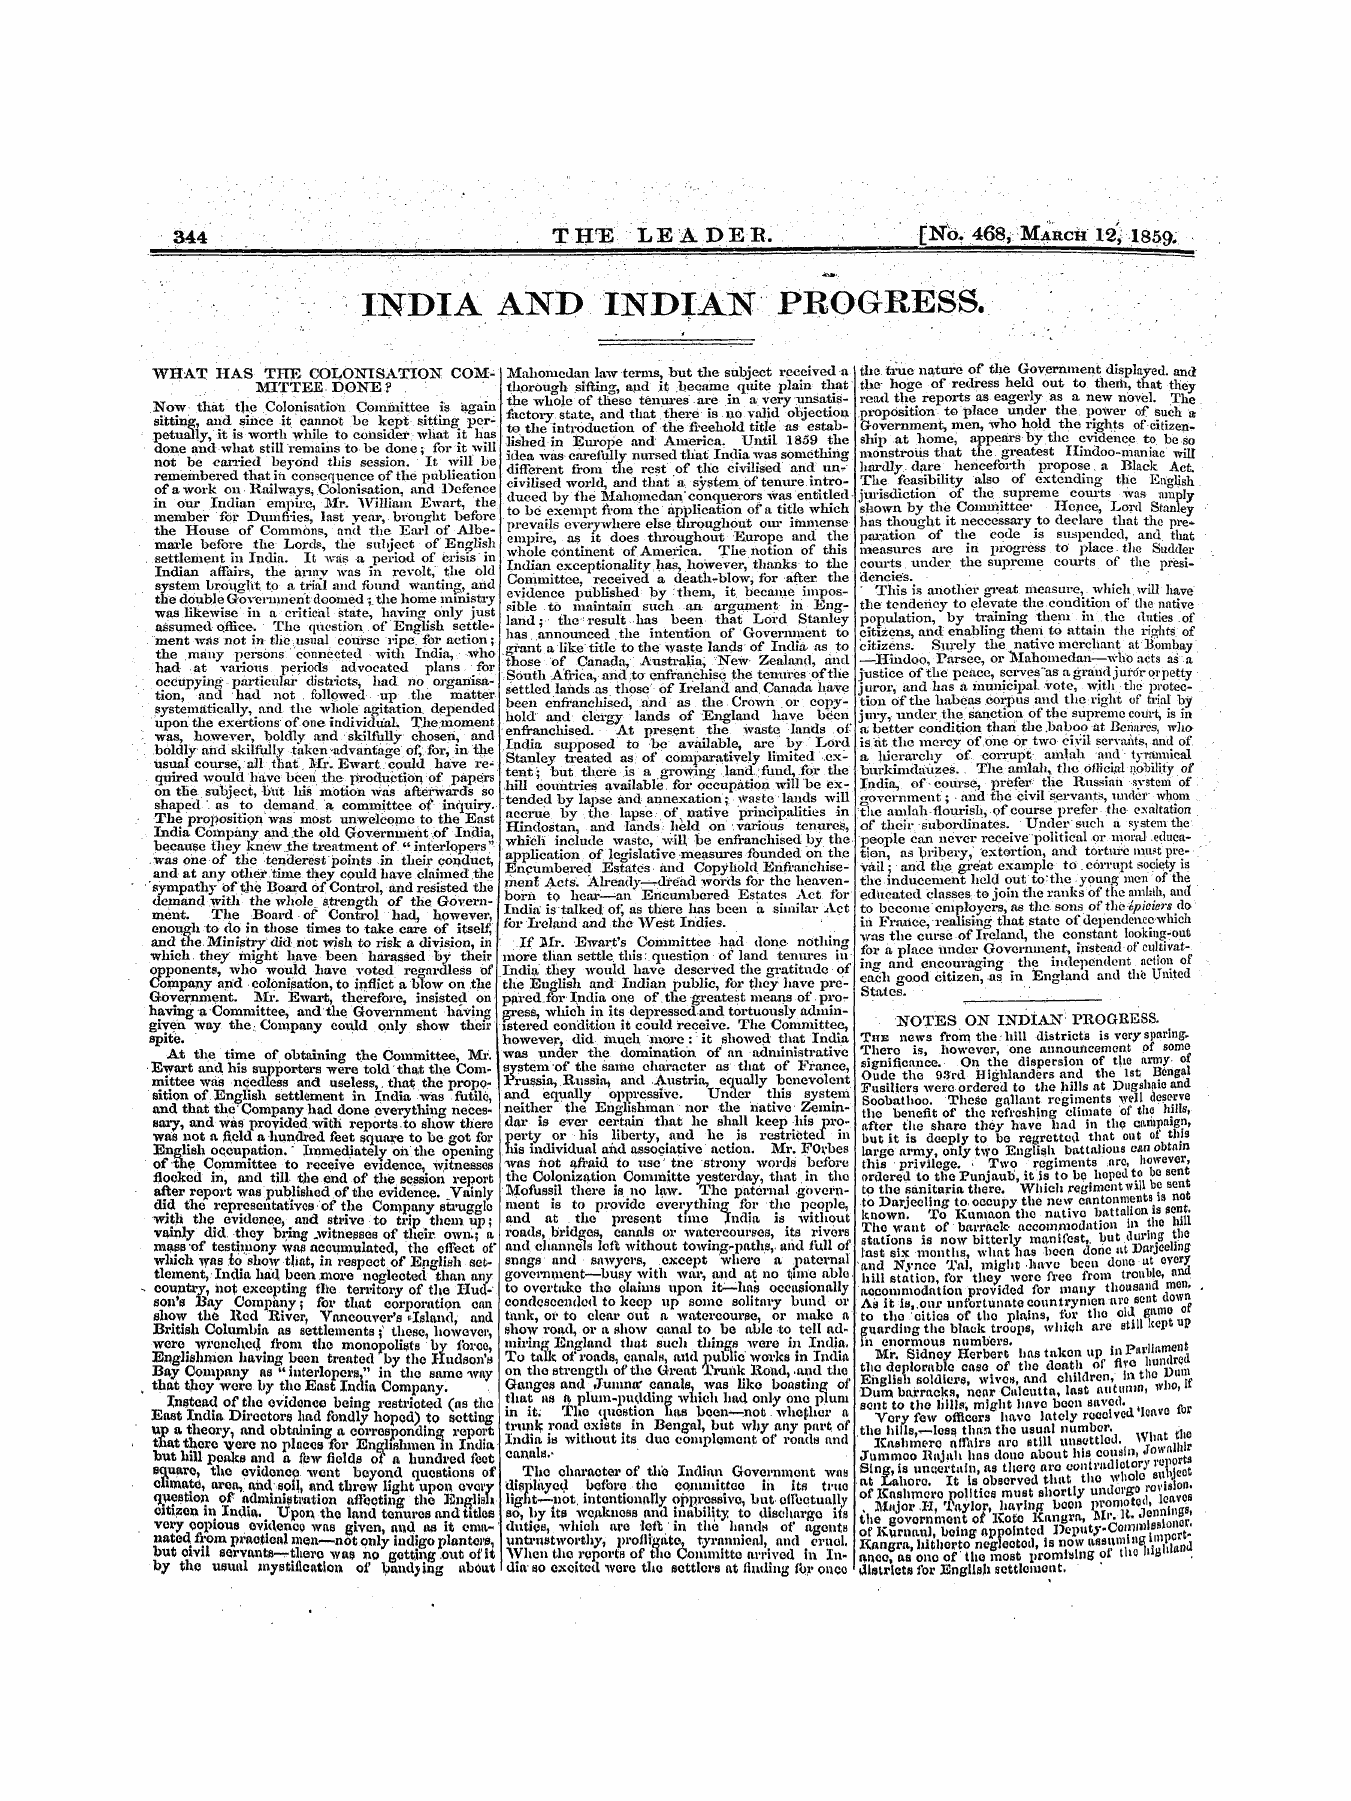 Leader (1850-1860): jS F Y, 1st edition - Esfdja And Indiah Progress.